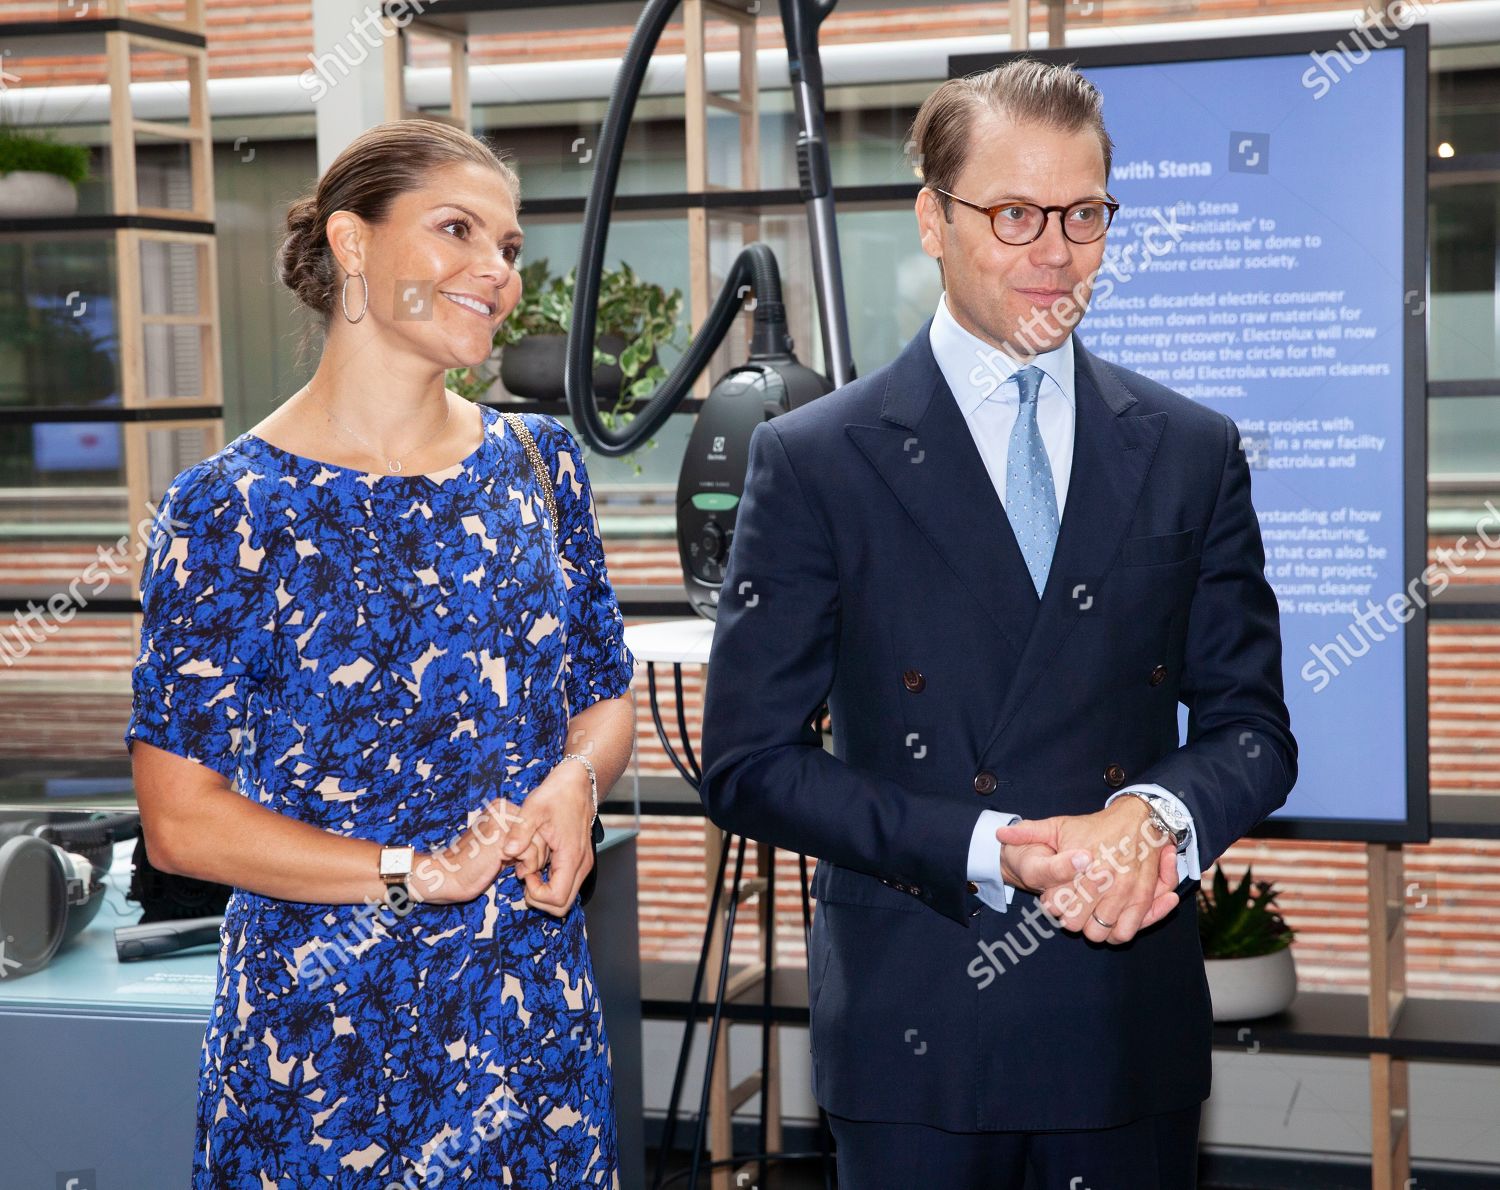 crown-princess-victoria-and-prince-daniel-visit-the-electrolux-company-stockholm-sweden-shutterstock-editorial-10384877g.jpg